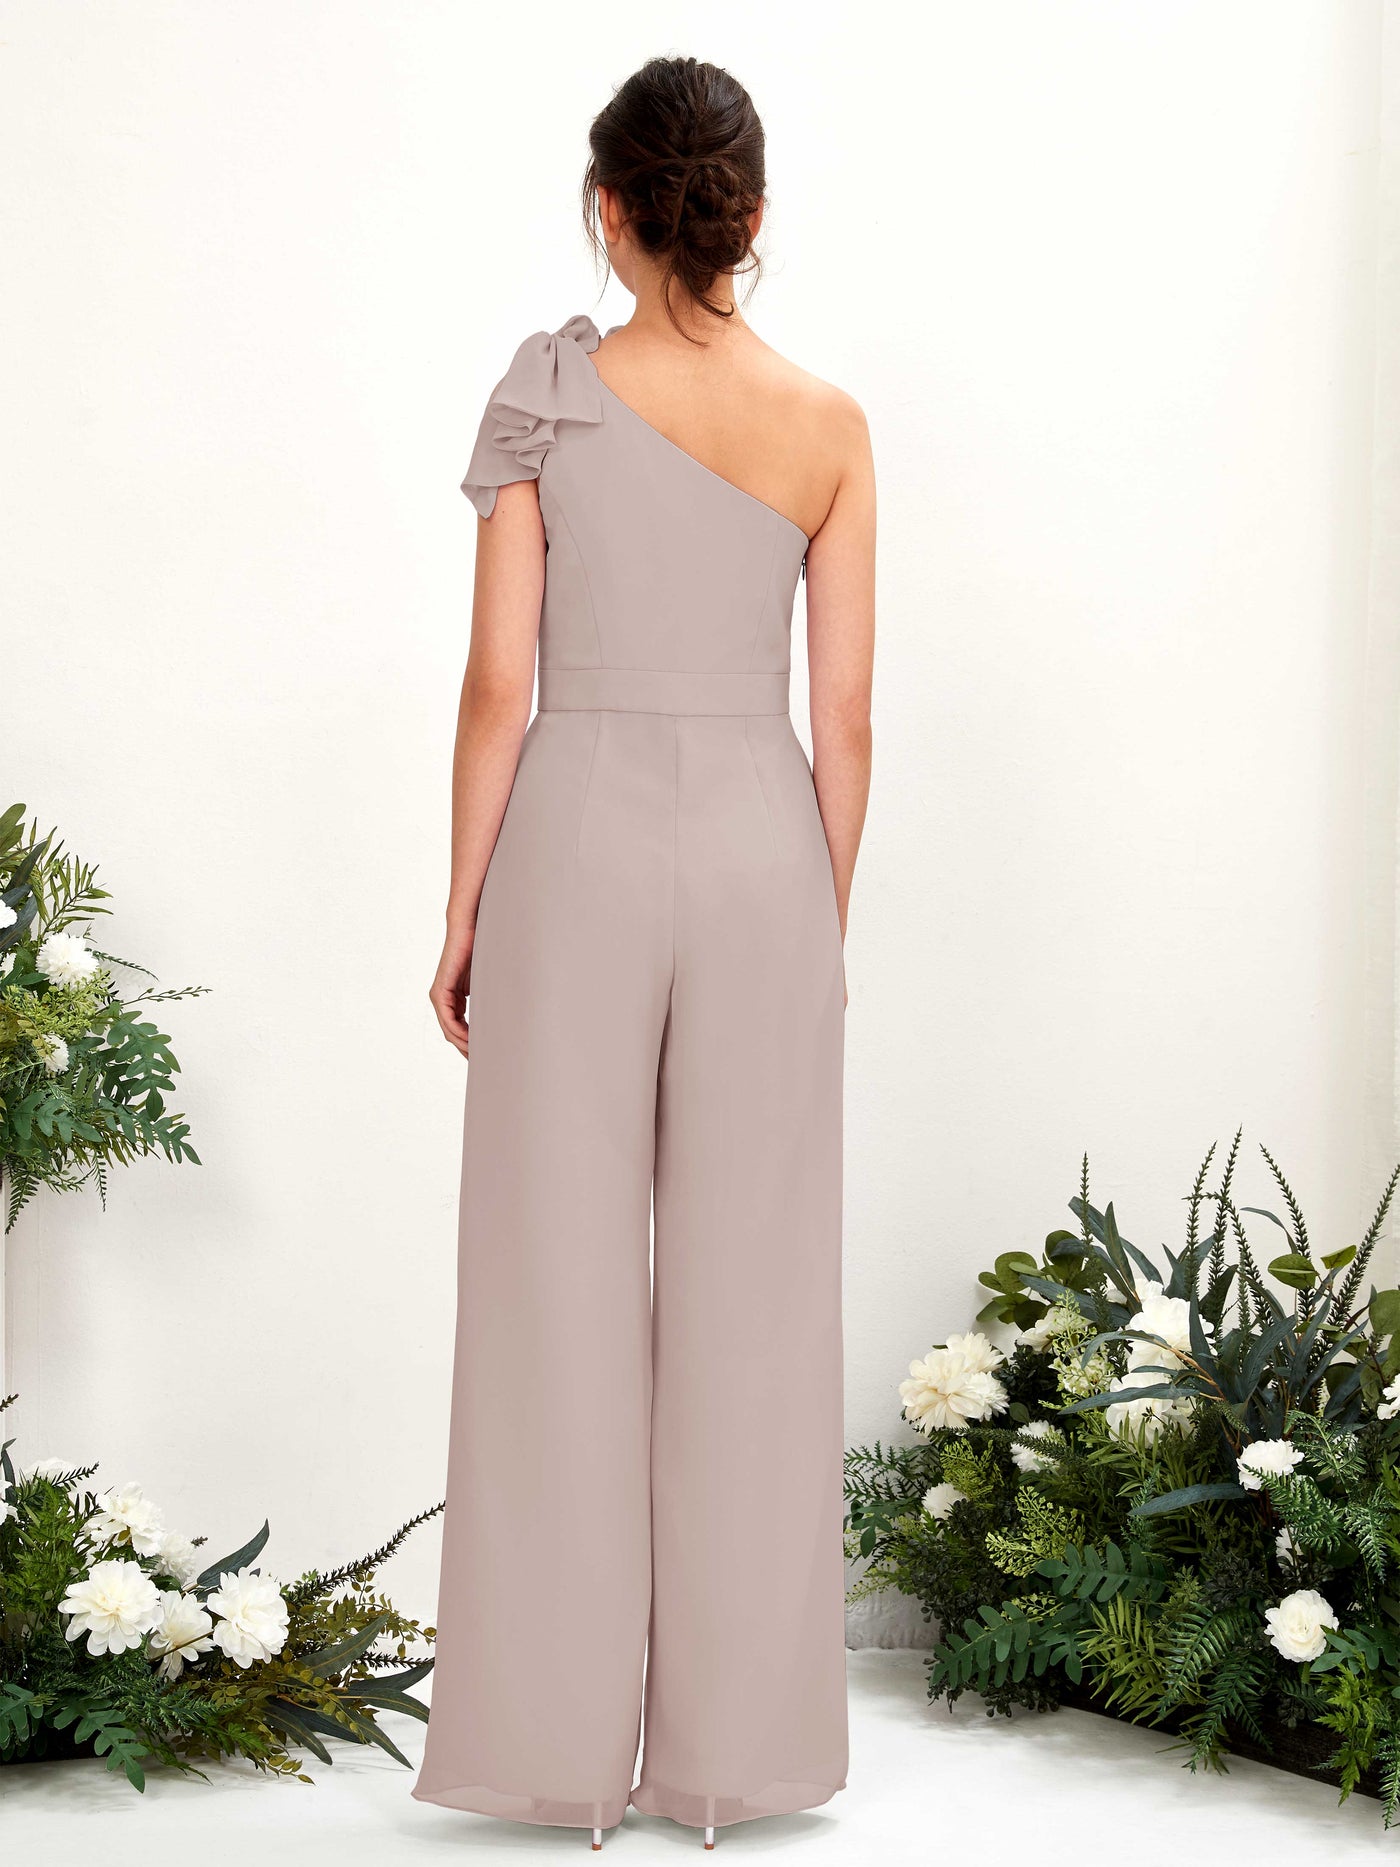 Taupe Bridesmaid Dresses Bridesmaid Dress Chiffon One Shoulder Full Length Sleeveless Wedding Party Dress (81220824)#color_taupe